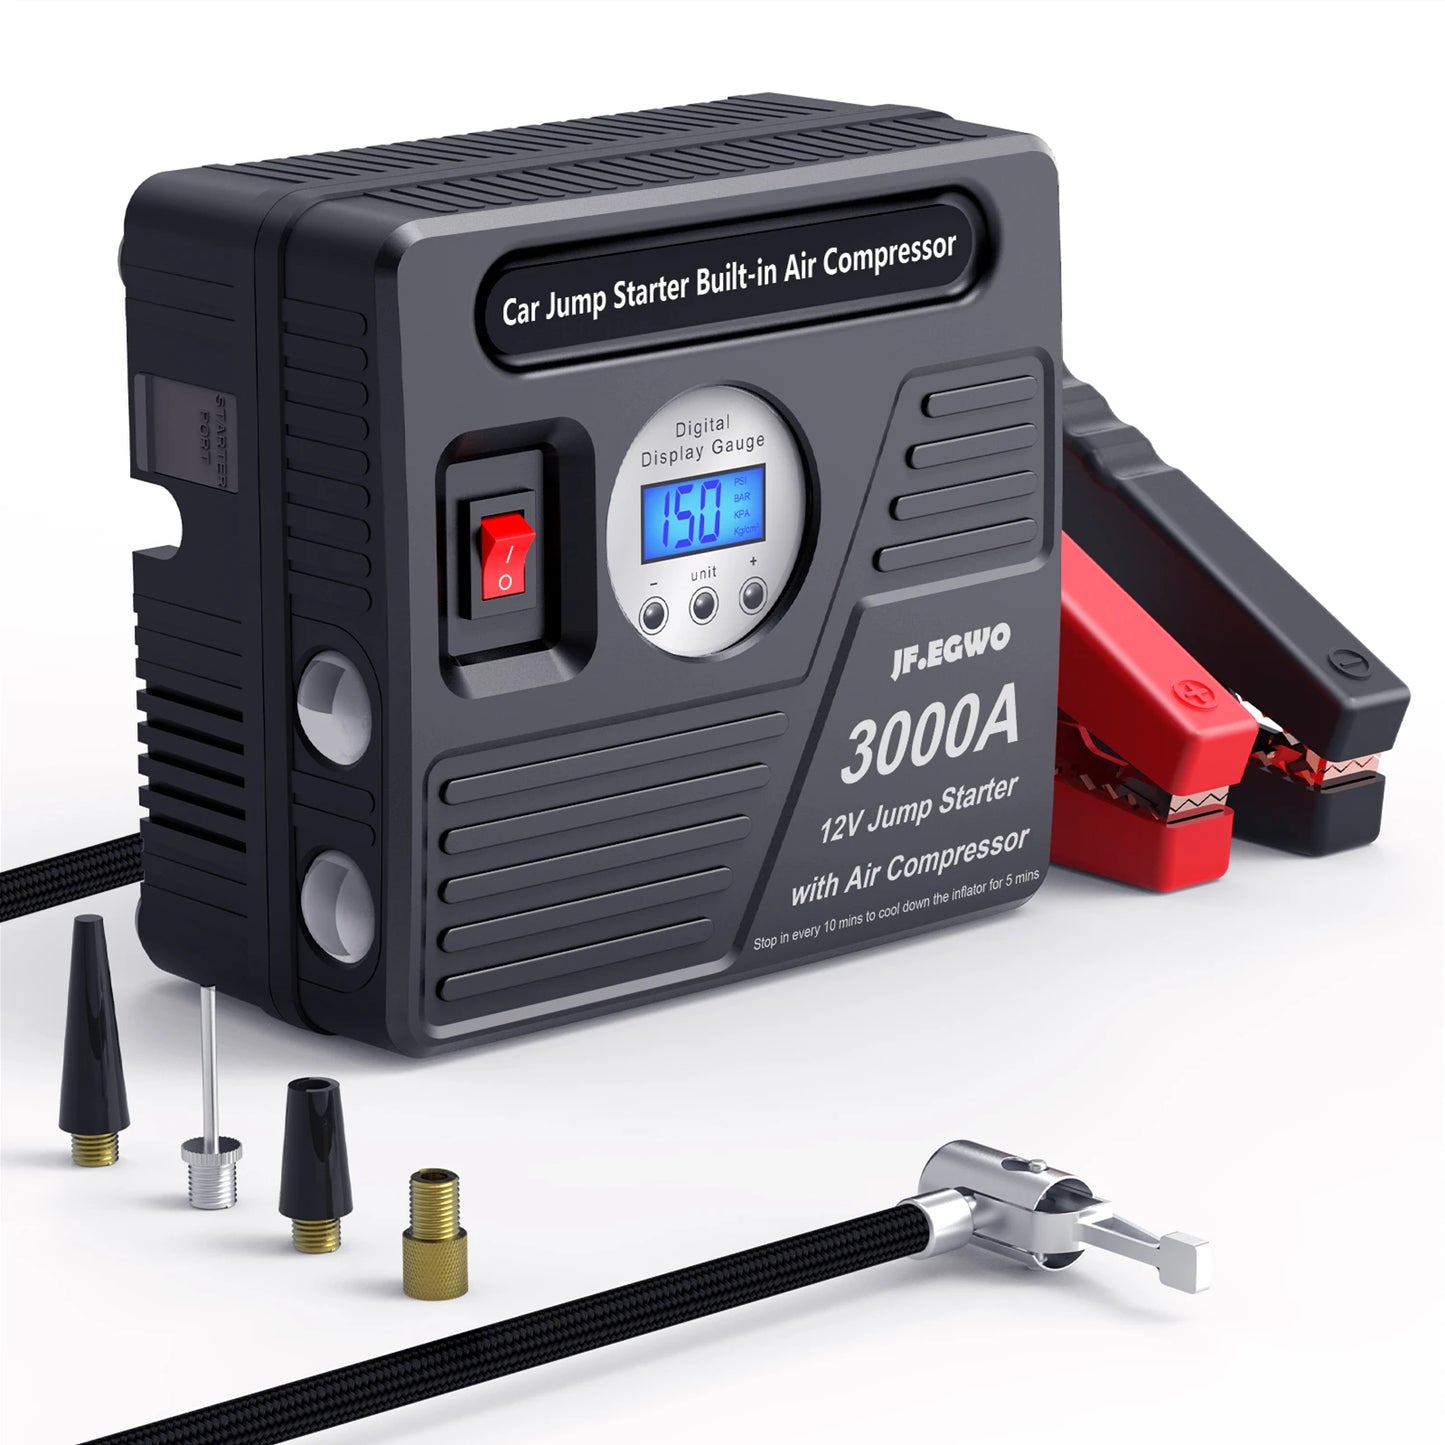 4000A, 3000A, and 12V Professional Car Jump Starter Power Bank With Air Compressor Pump